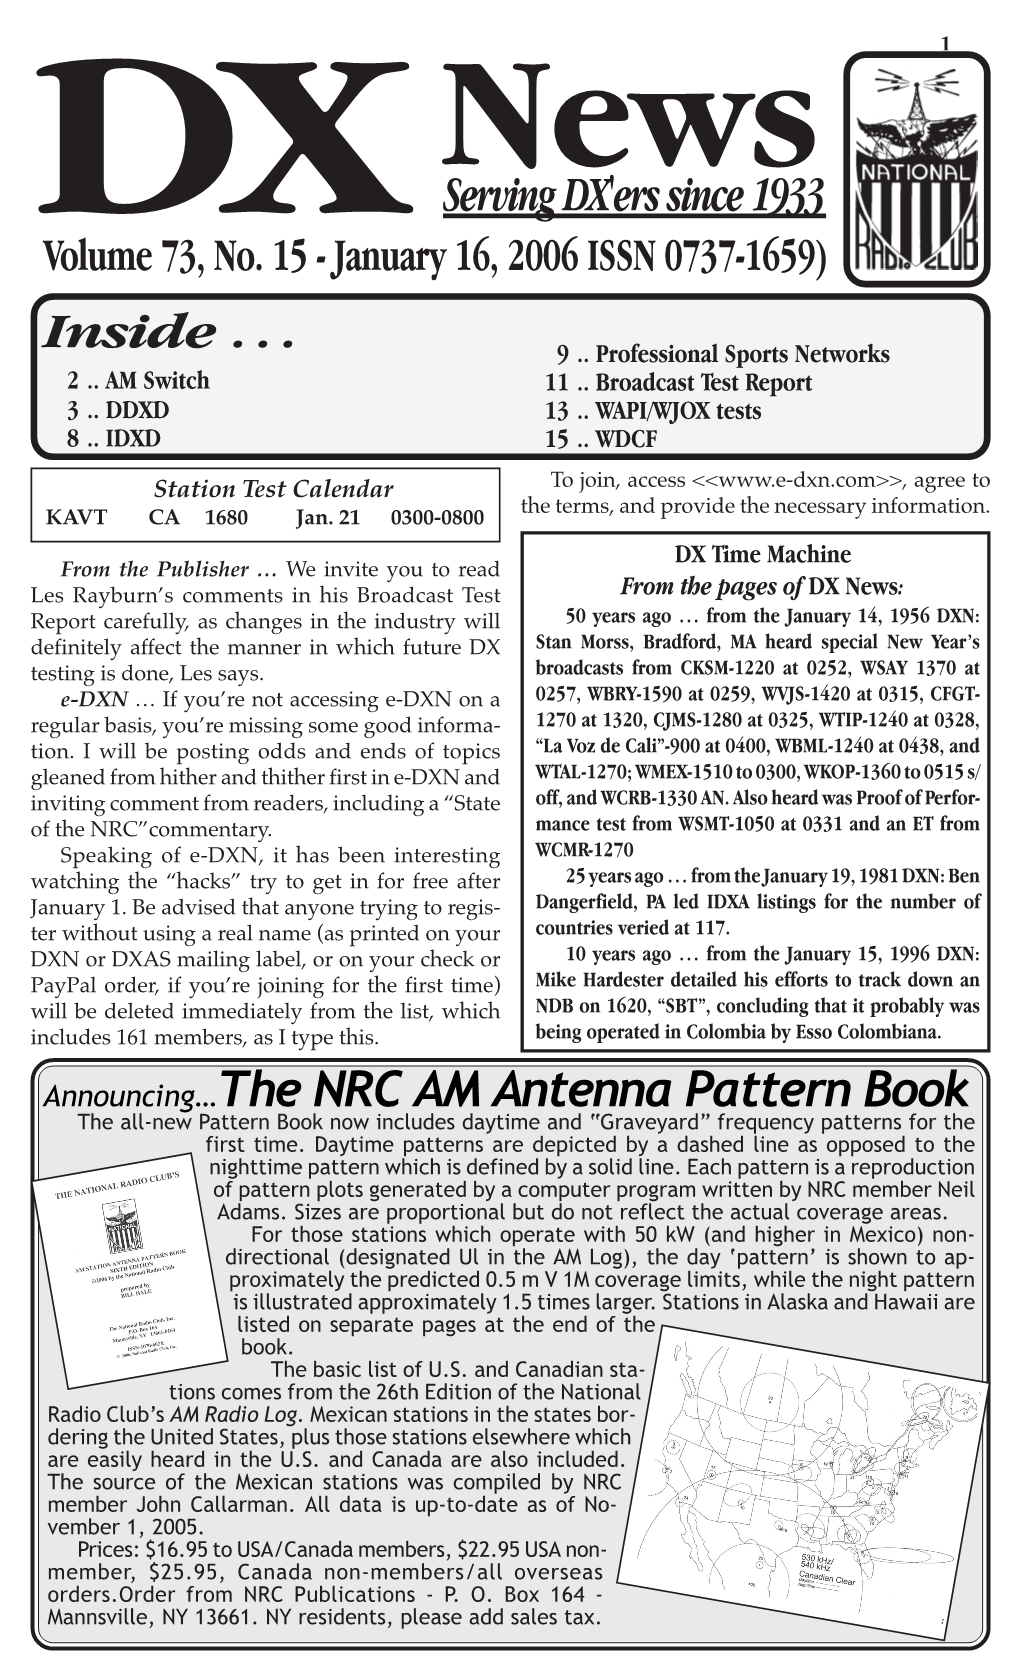 The NRC AM Antenna Pattern Book the All-New Pattern Book Now Includes Daytime and “Graveyard” Frequency Patterns for the First Time